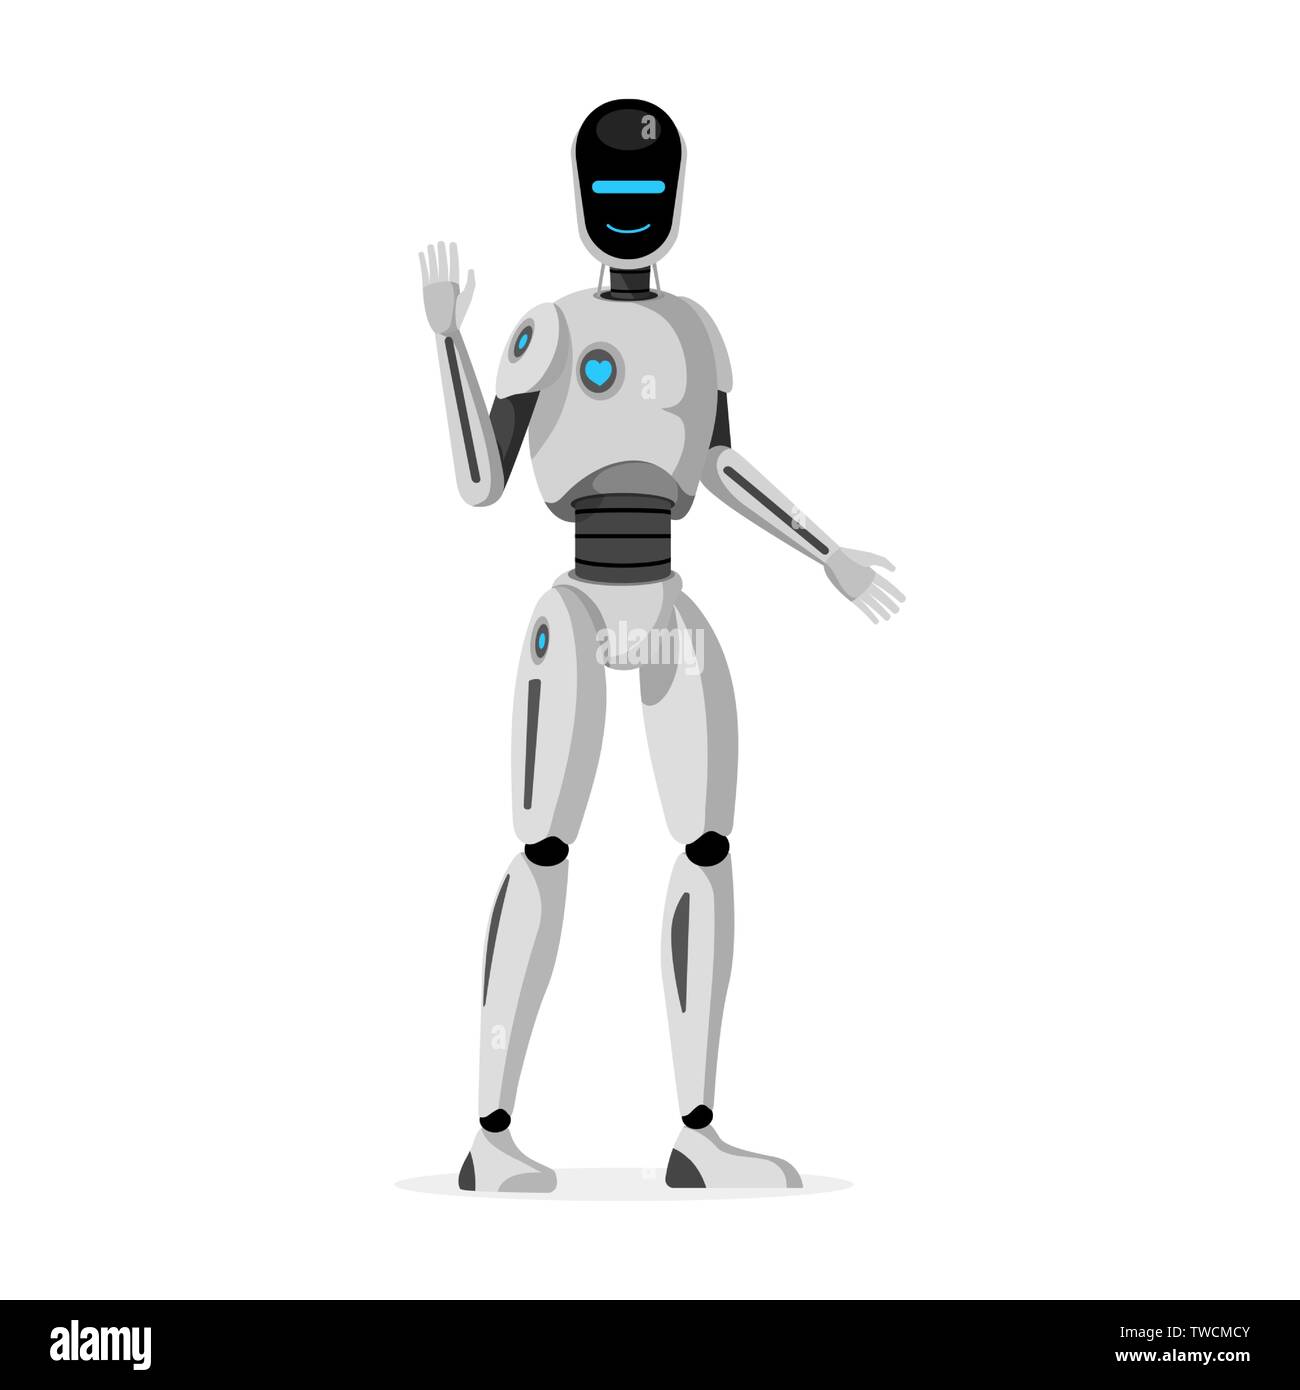 Premium AI Image  A drawing of a robot with a large body and a